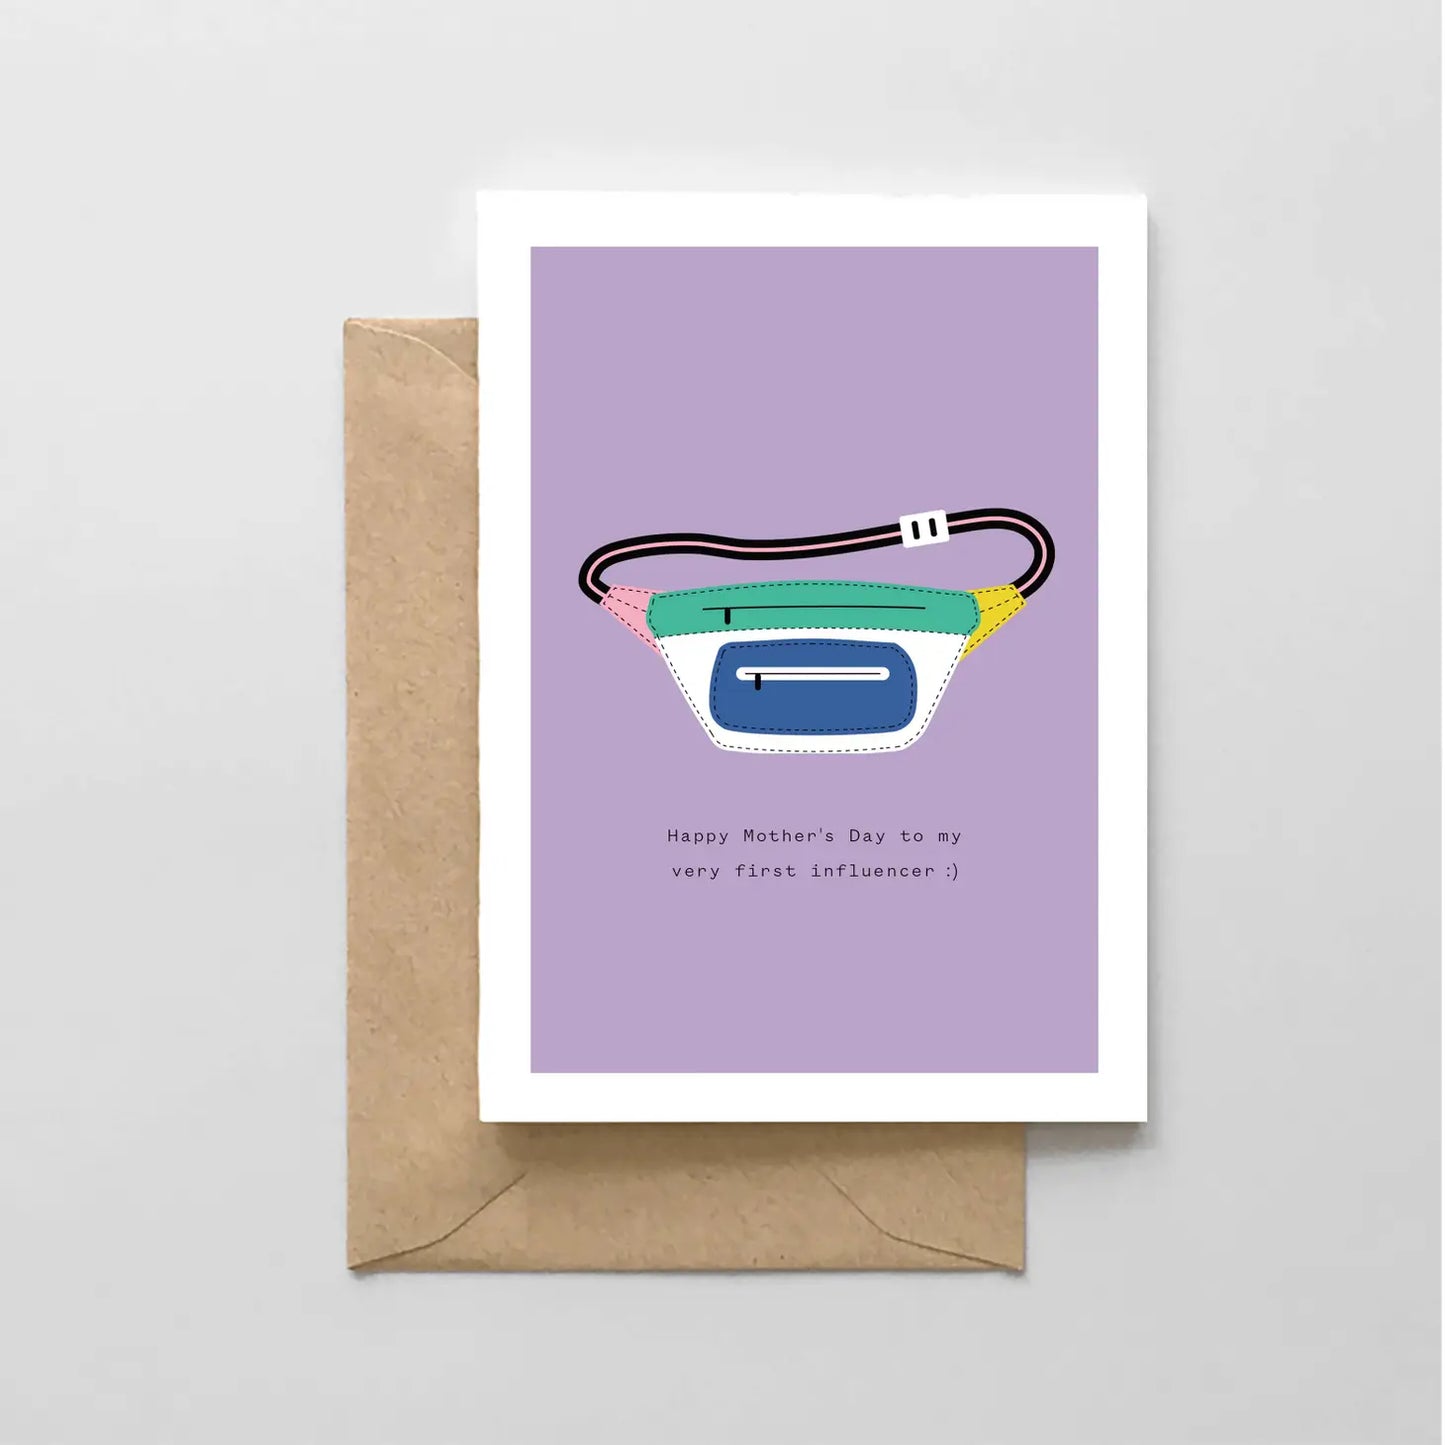 Fanny Pack First Influencer - Greeting Card